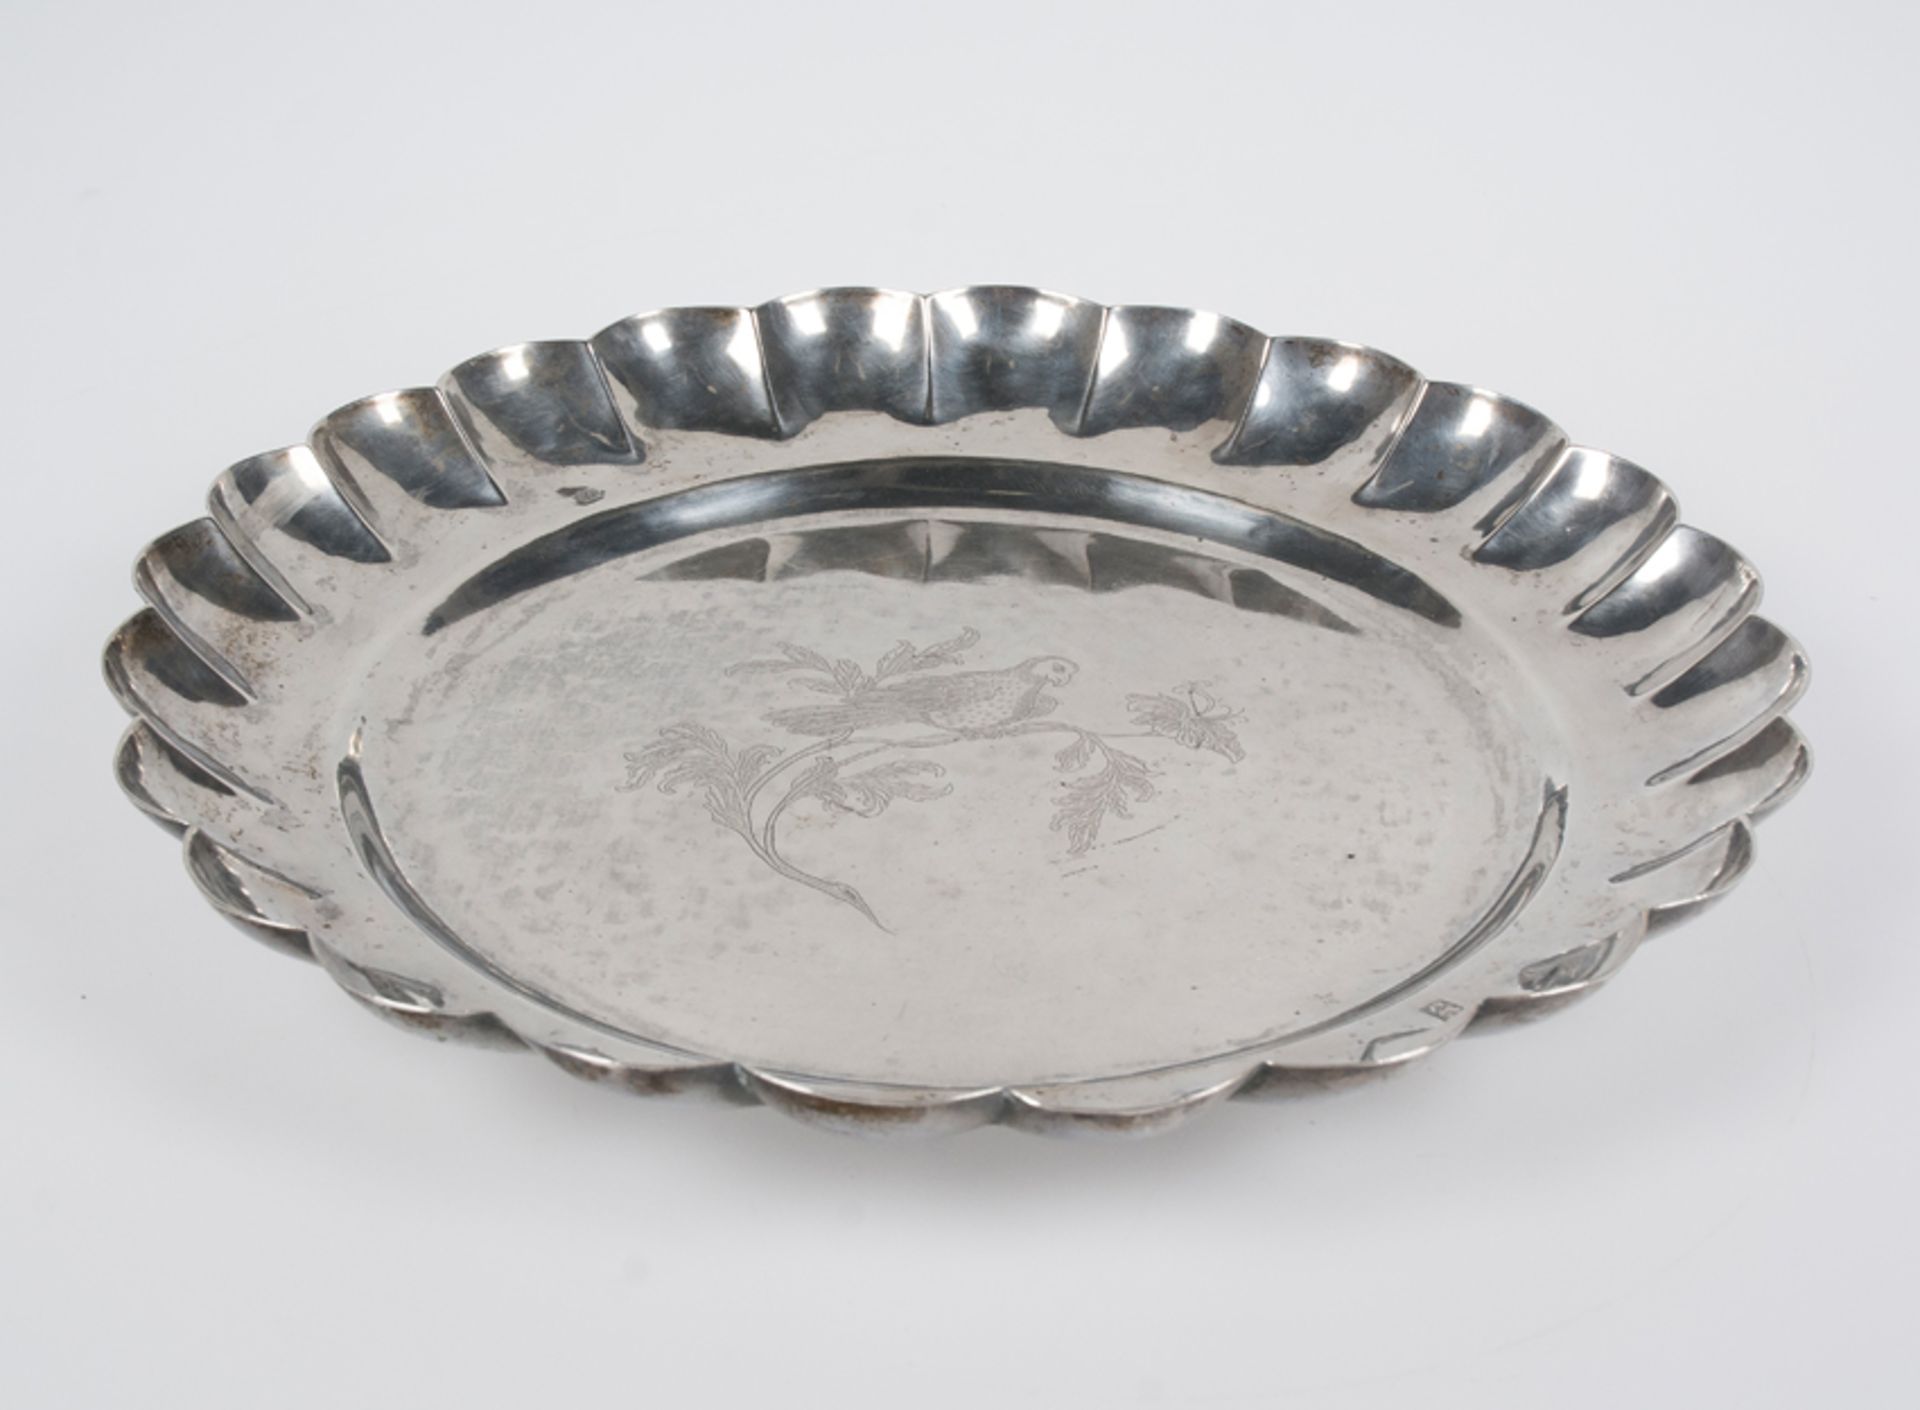 Large silver plate. Colonial work. Possibly Guatemala or Leon, Nicaragua. 18th century.